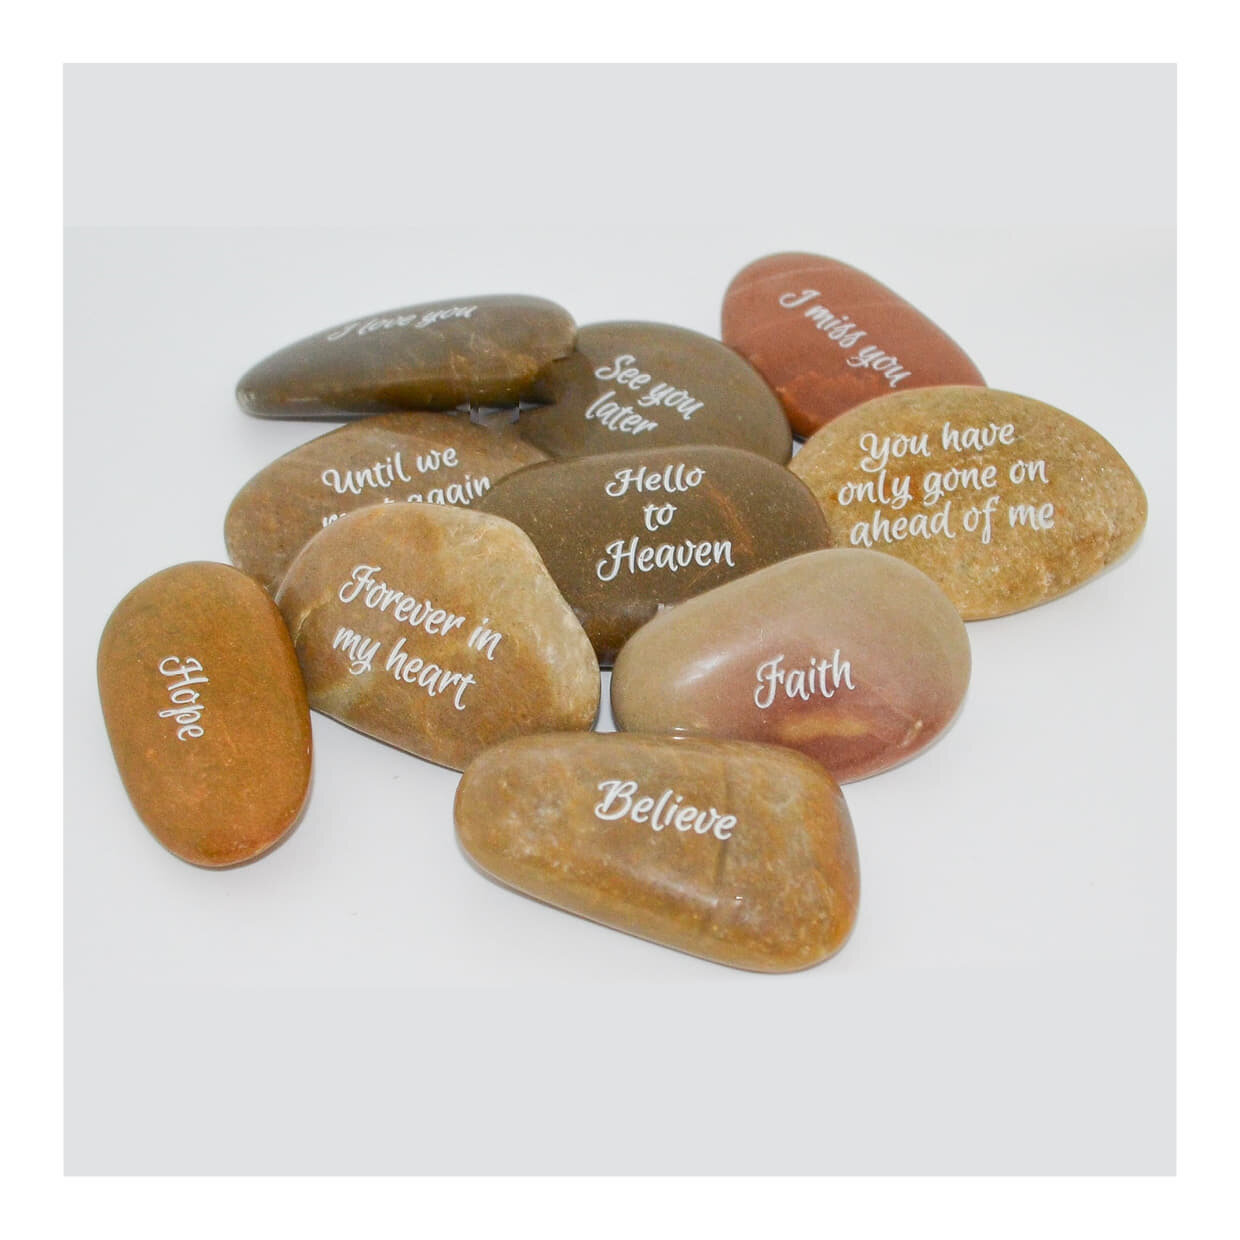 Engraved Memorial Stone & Card Packages・From Hello to Heaven